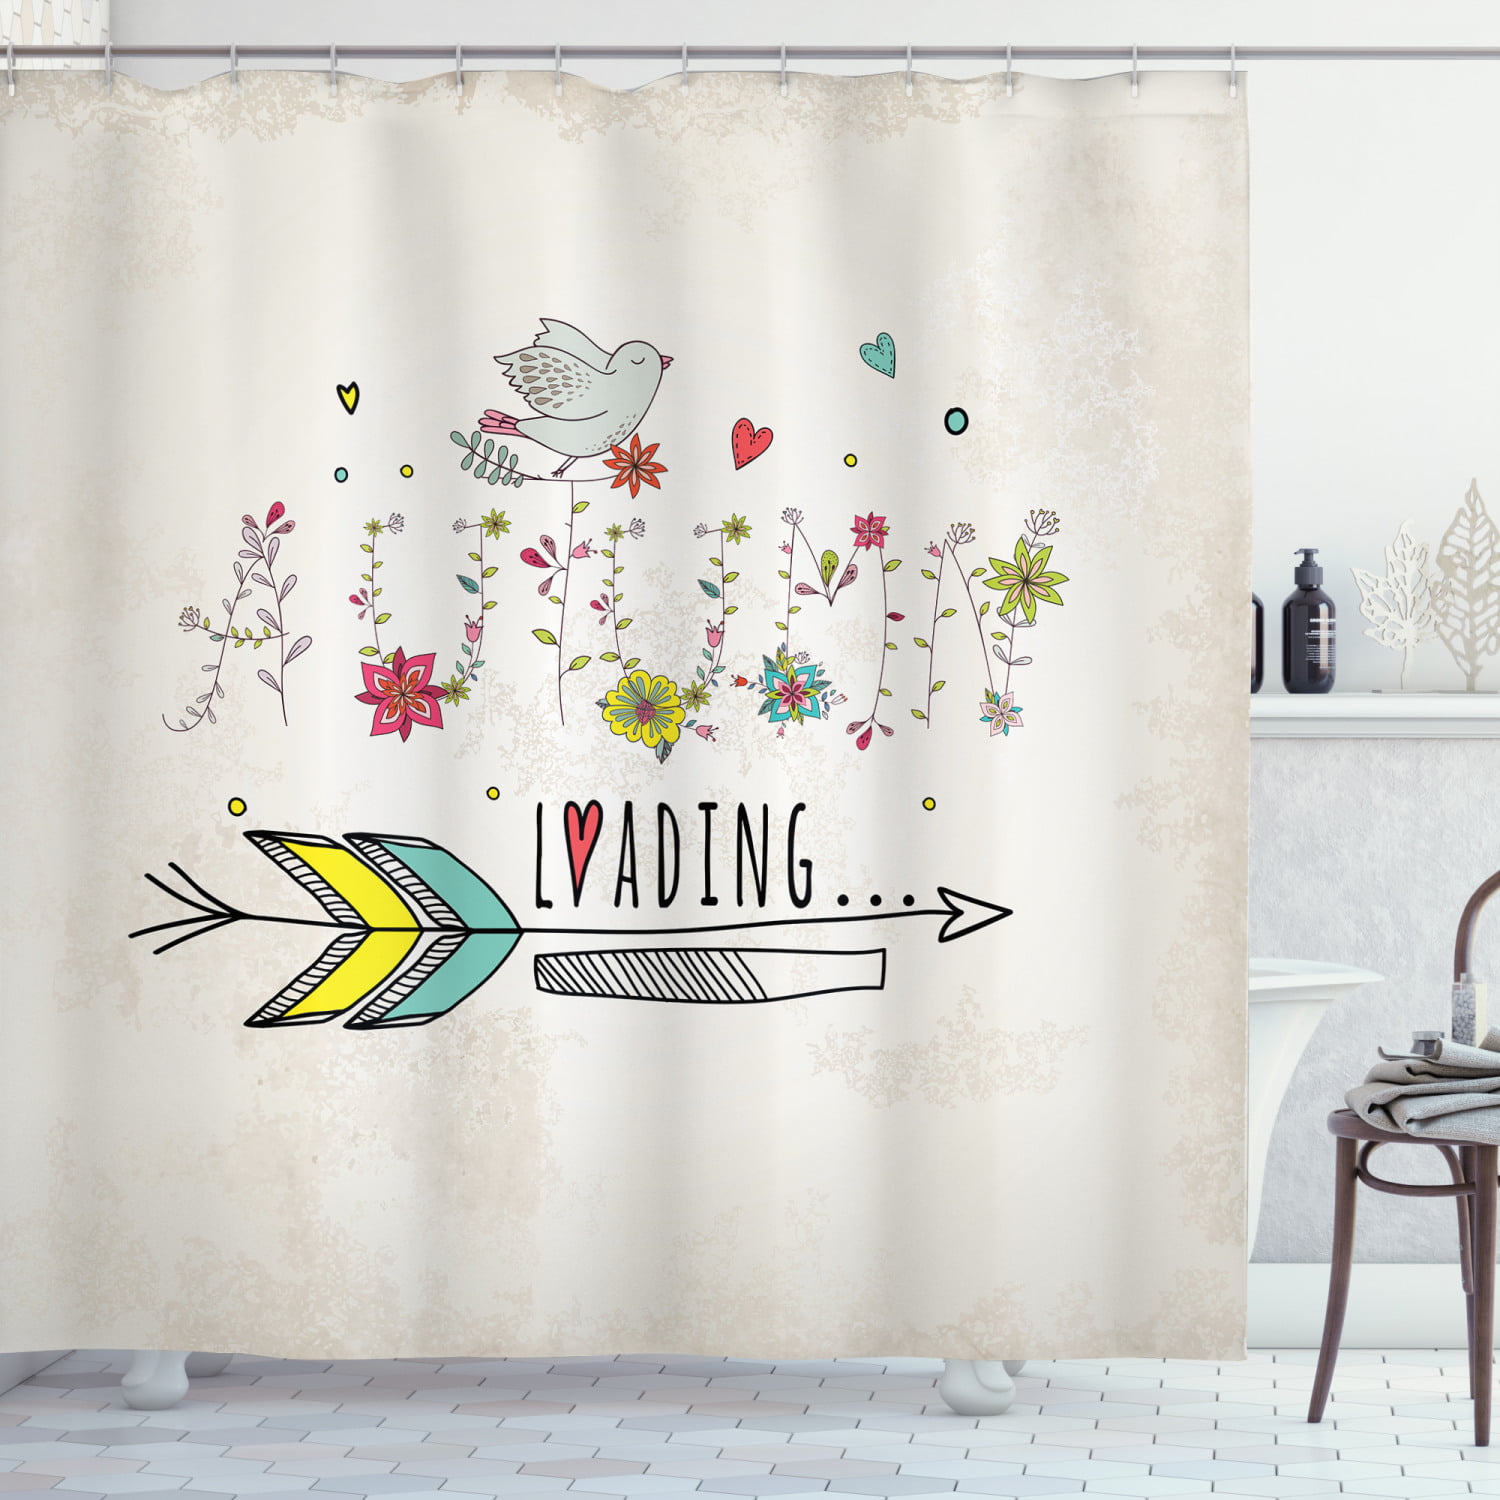 Quotes Decor Shower Curtain Set, Autumn Is Loading Phrase With Flowers And  Arrow Floral Elements Vintage Style Art, Bathroom Accessories, 69W X 70L  Inches, By Ambesonne - Walmart.com